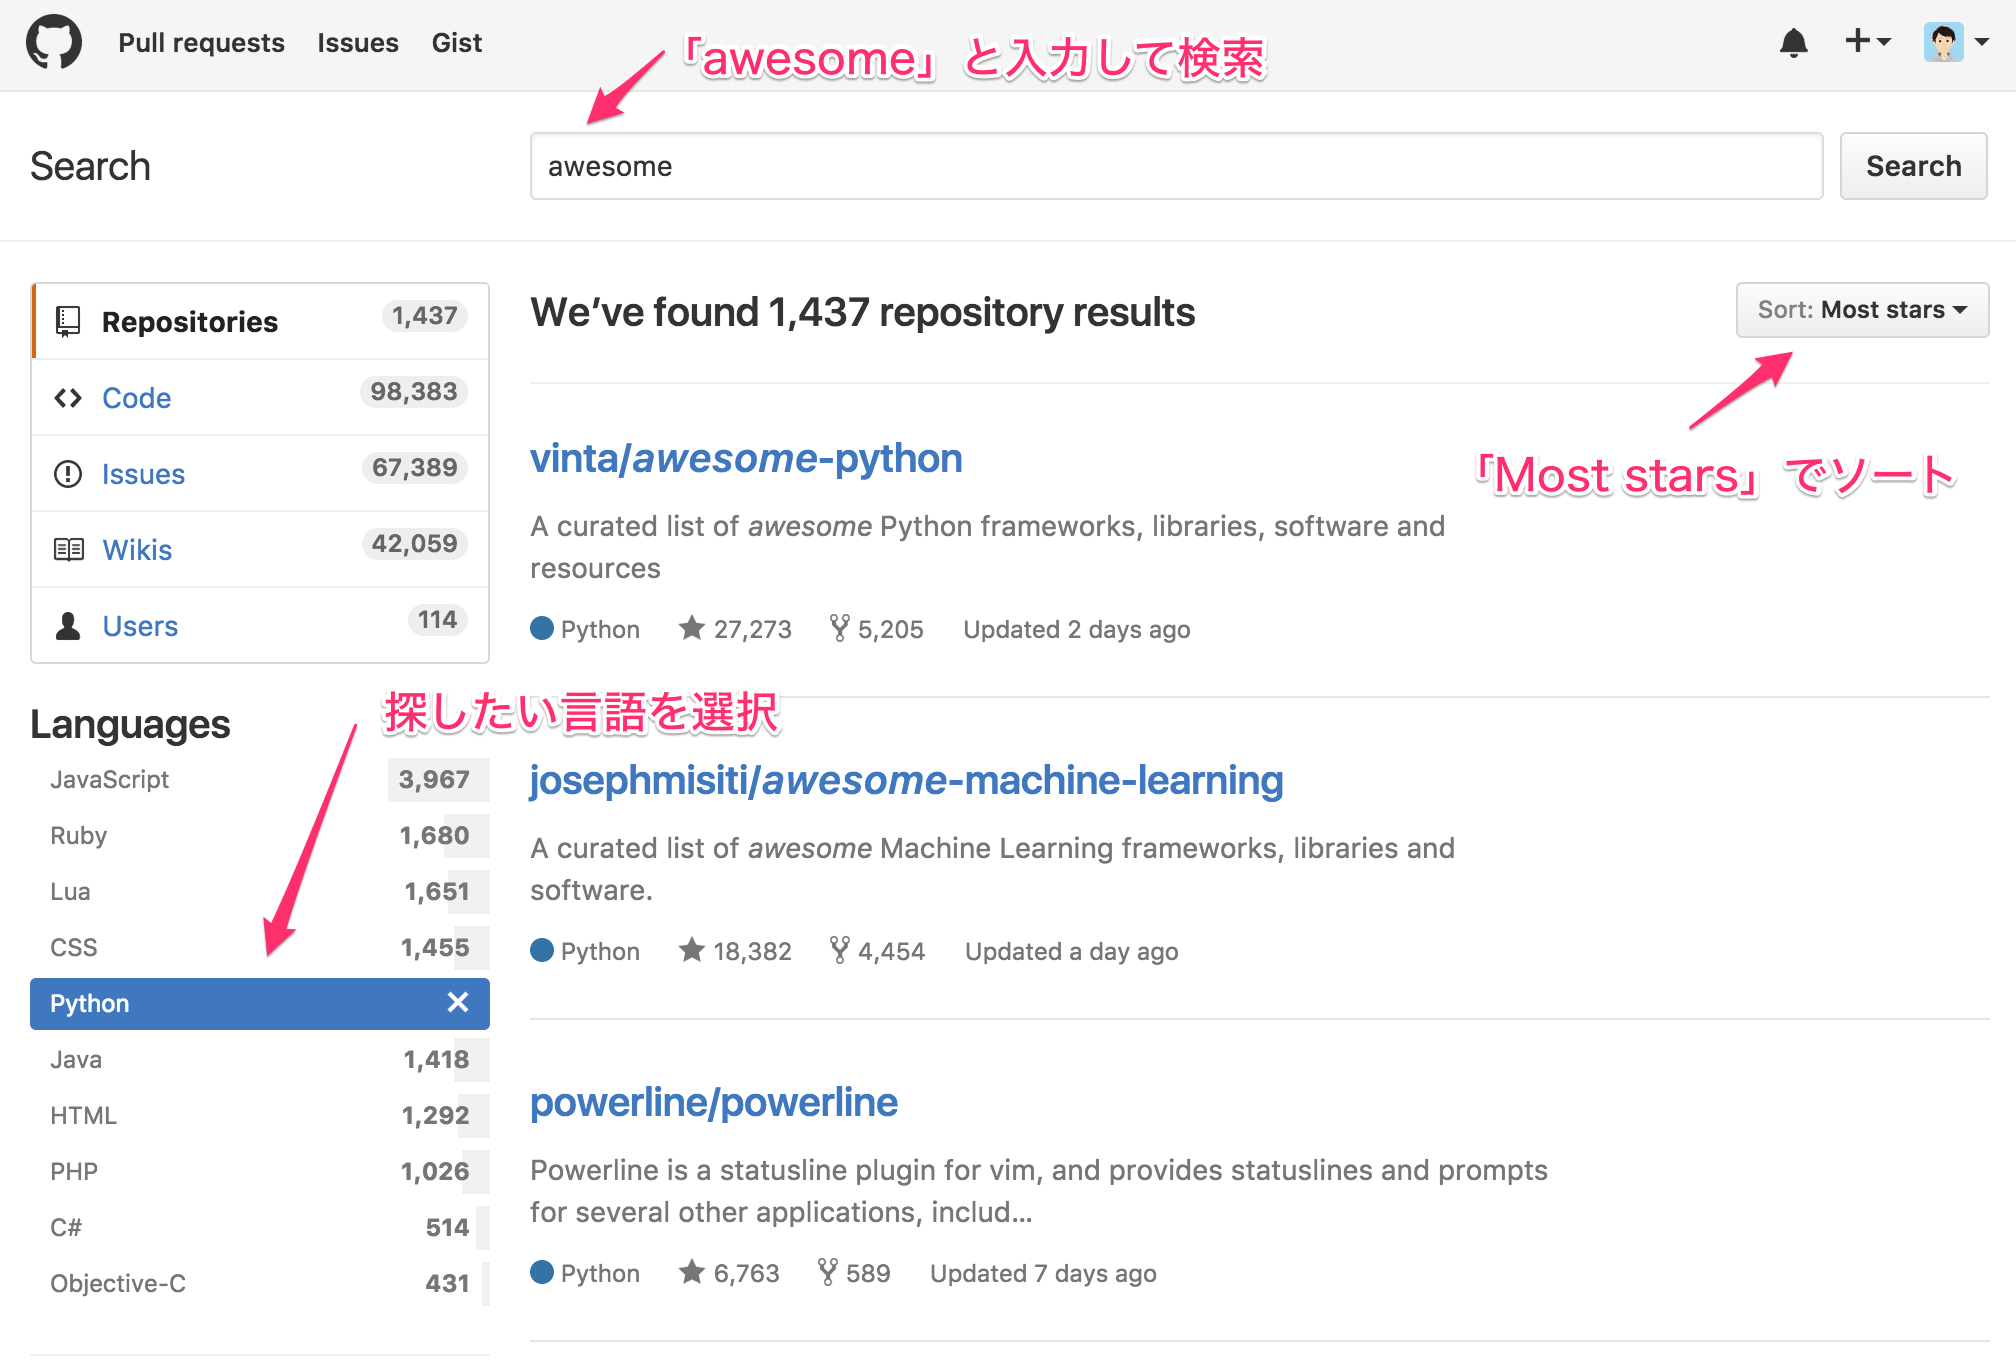 github_awesome_search2.png